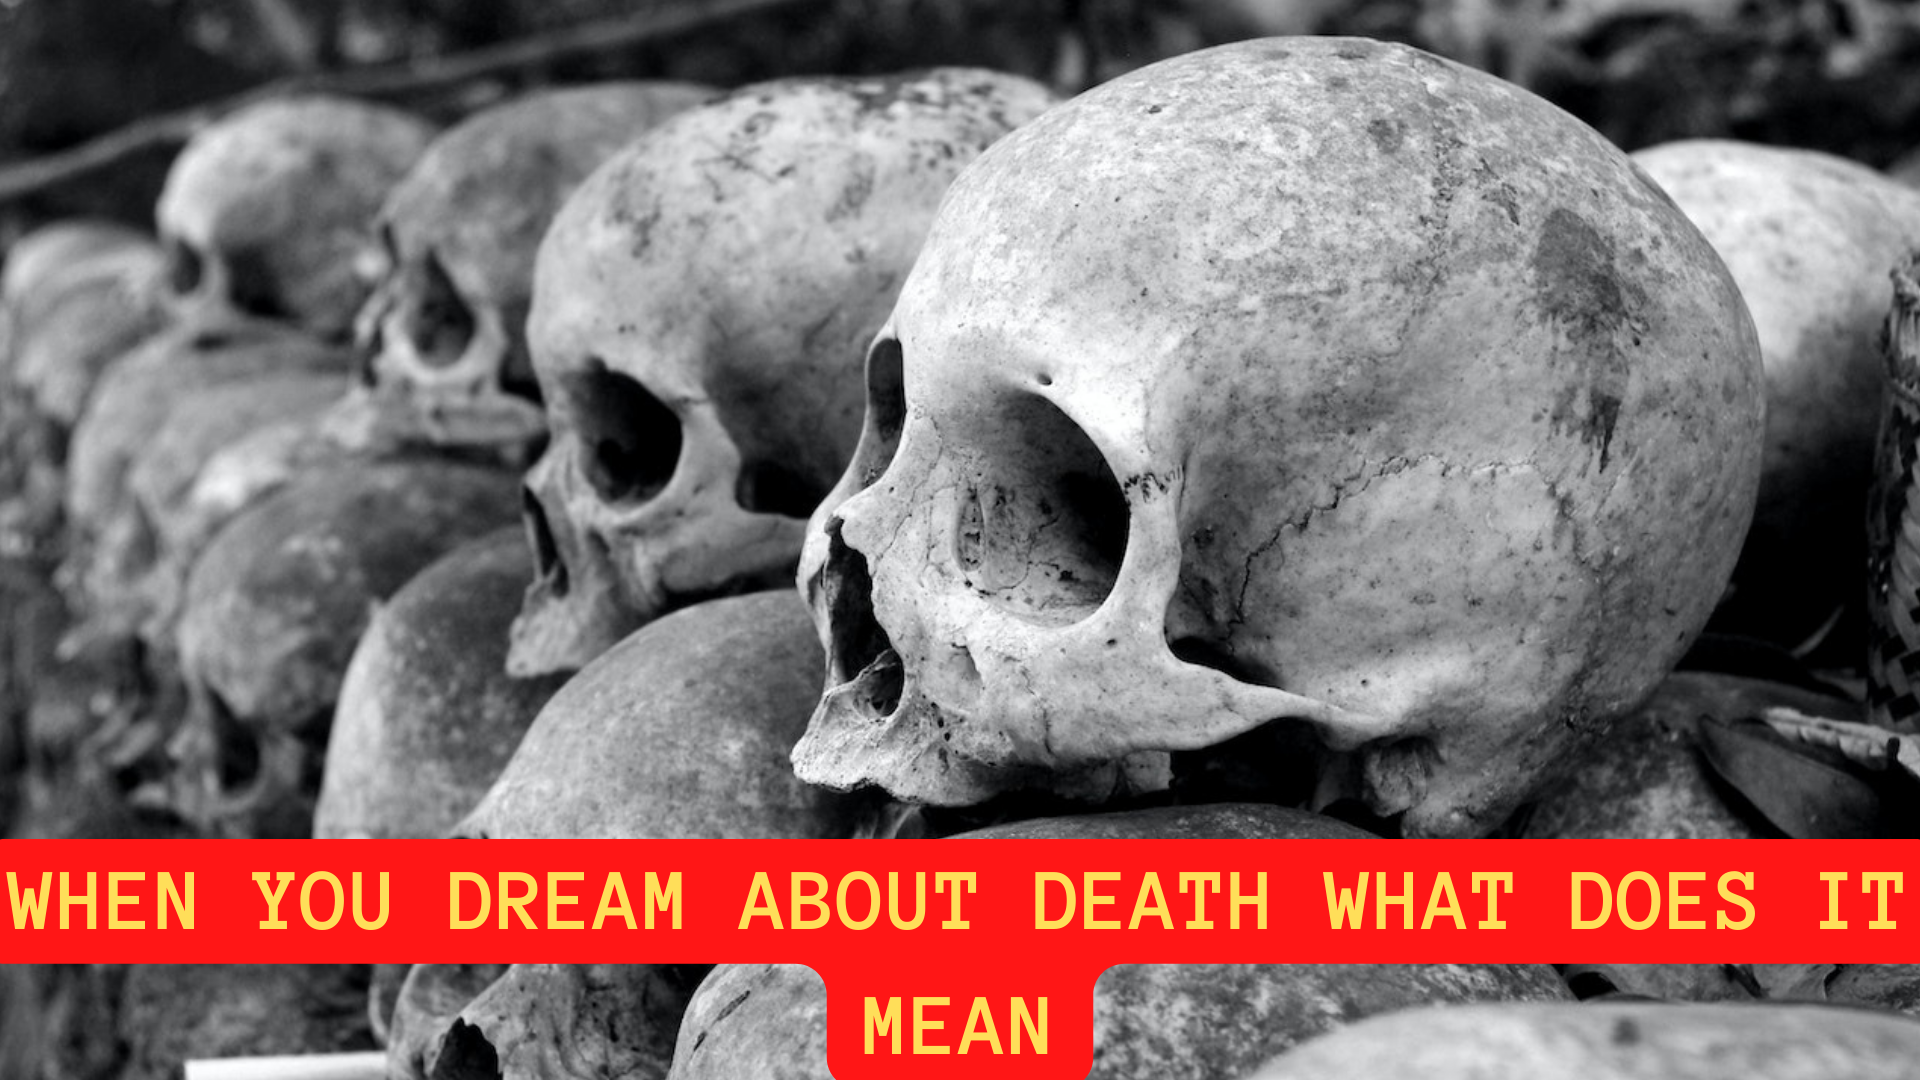 When You Dream About Death What Does It Mean?